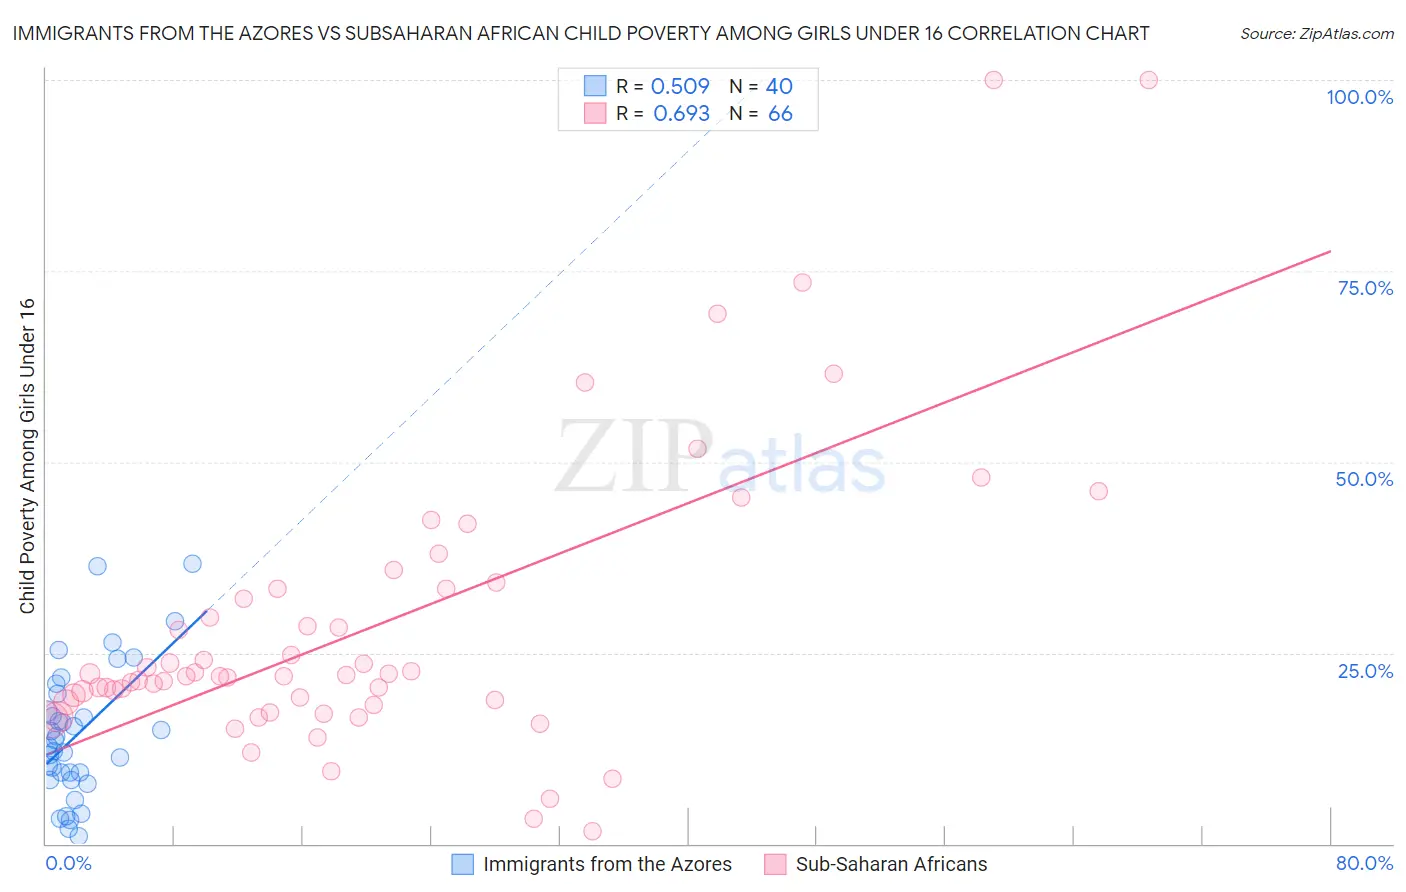 Immigrants from the Azores vs Subsaharan African Child Poverty Among Girls Under 16